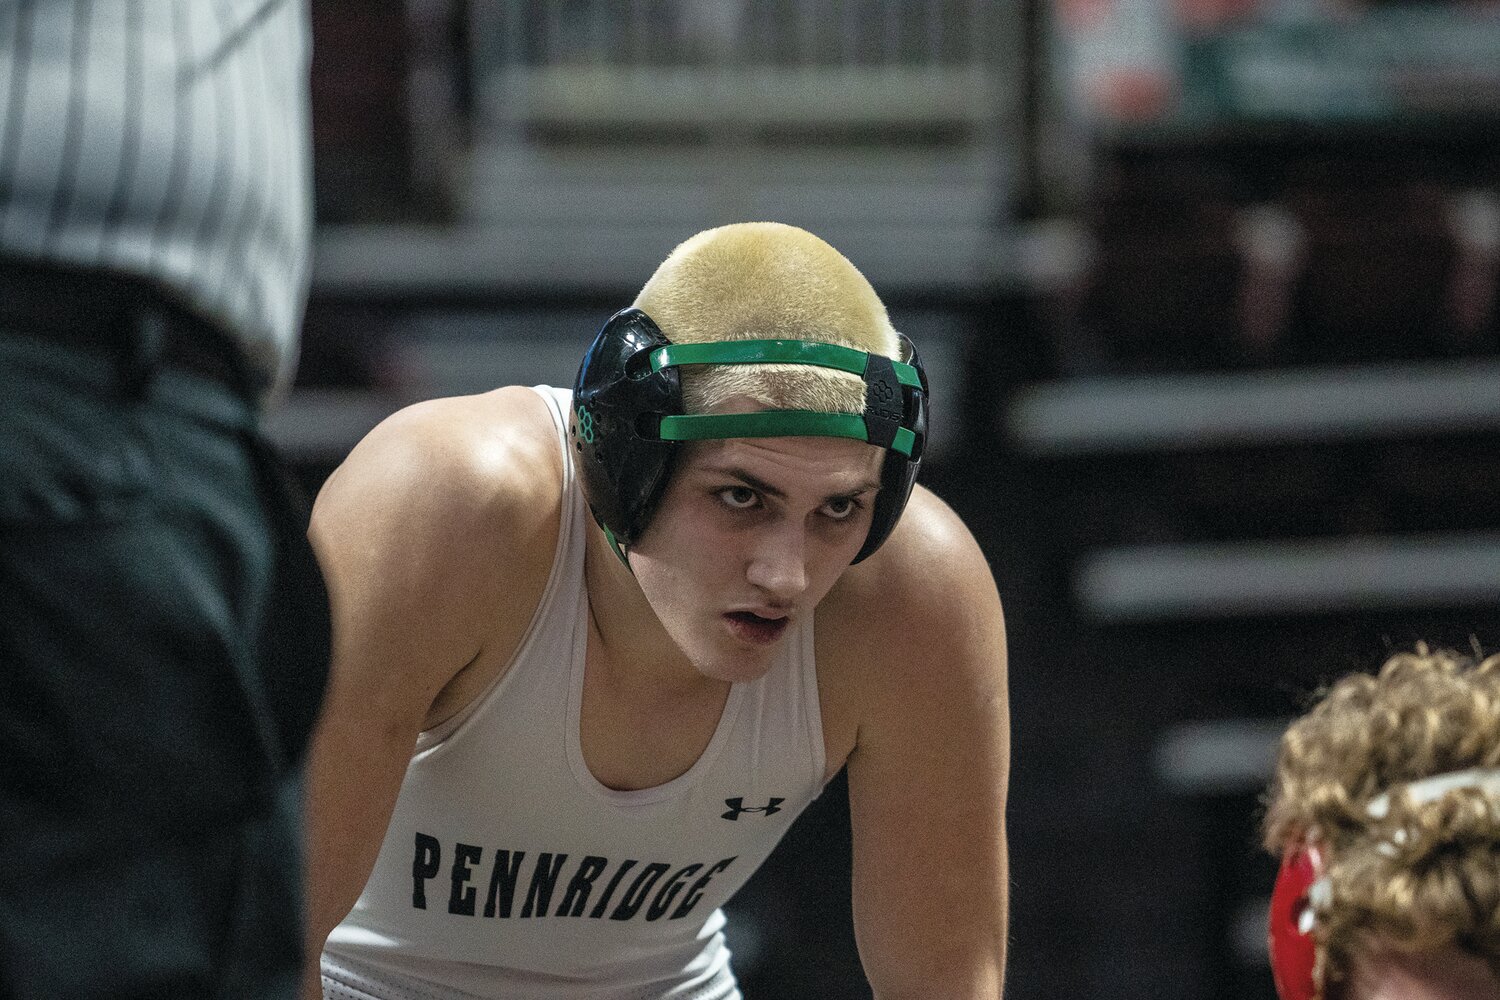 Pennridge wrestler Talan Hogan finished seventh in the 172-pound class of the PIAA 3A tournament.